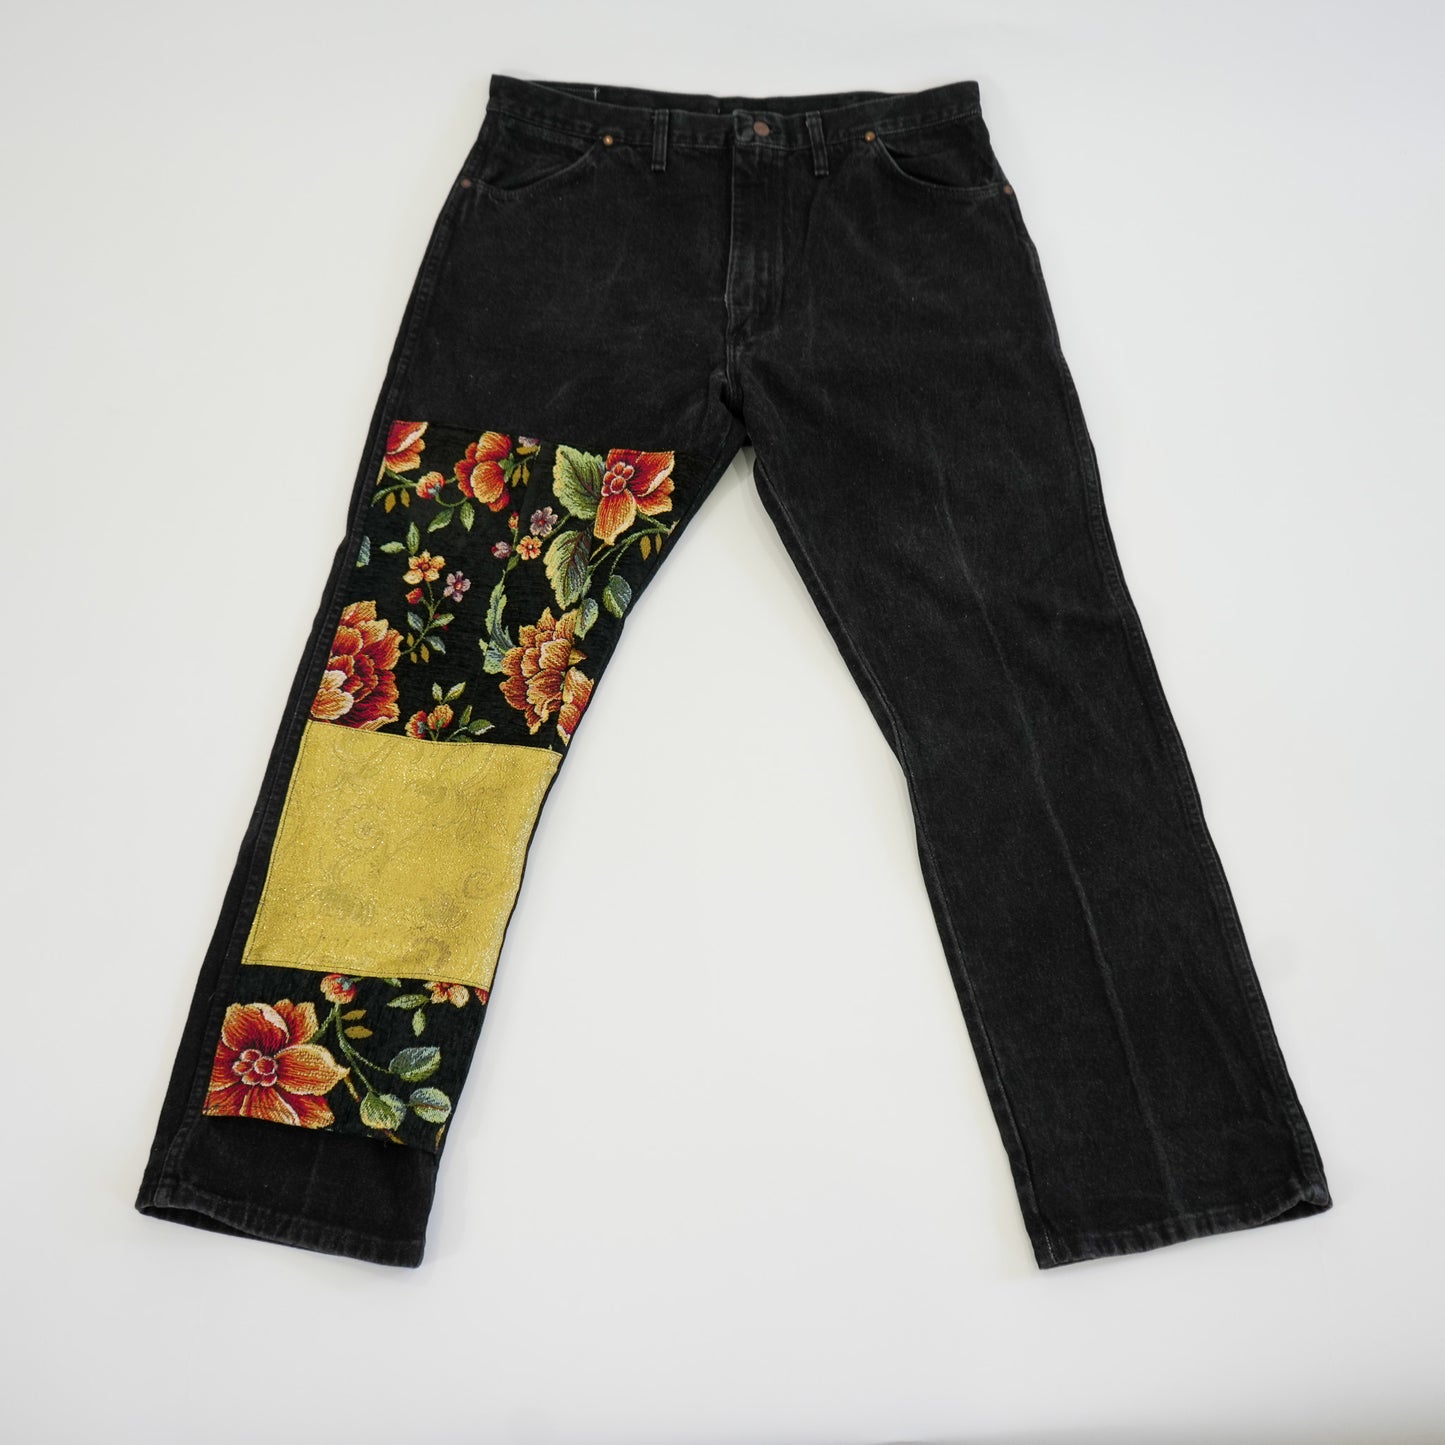 Floral Tapestry & Regal Patchwork Jeans (W 41)